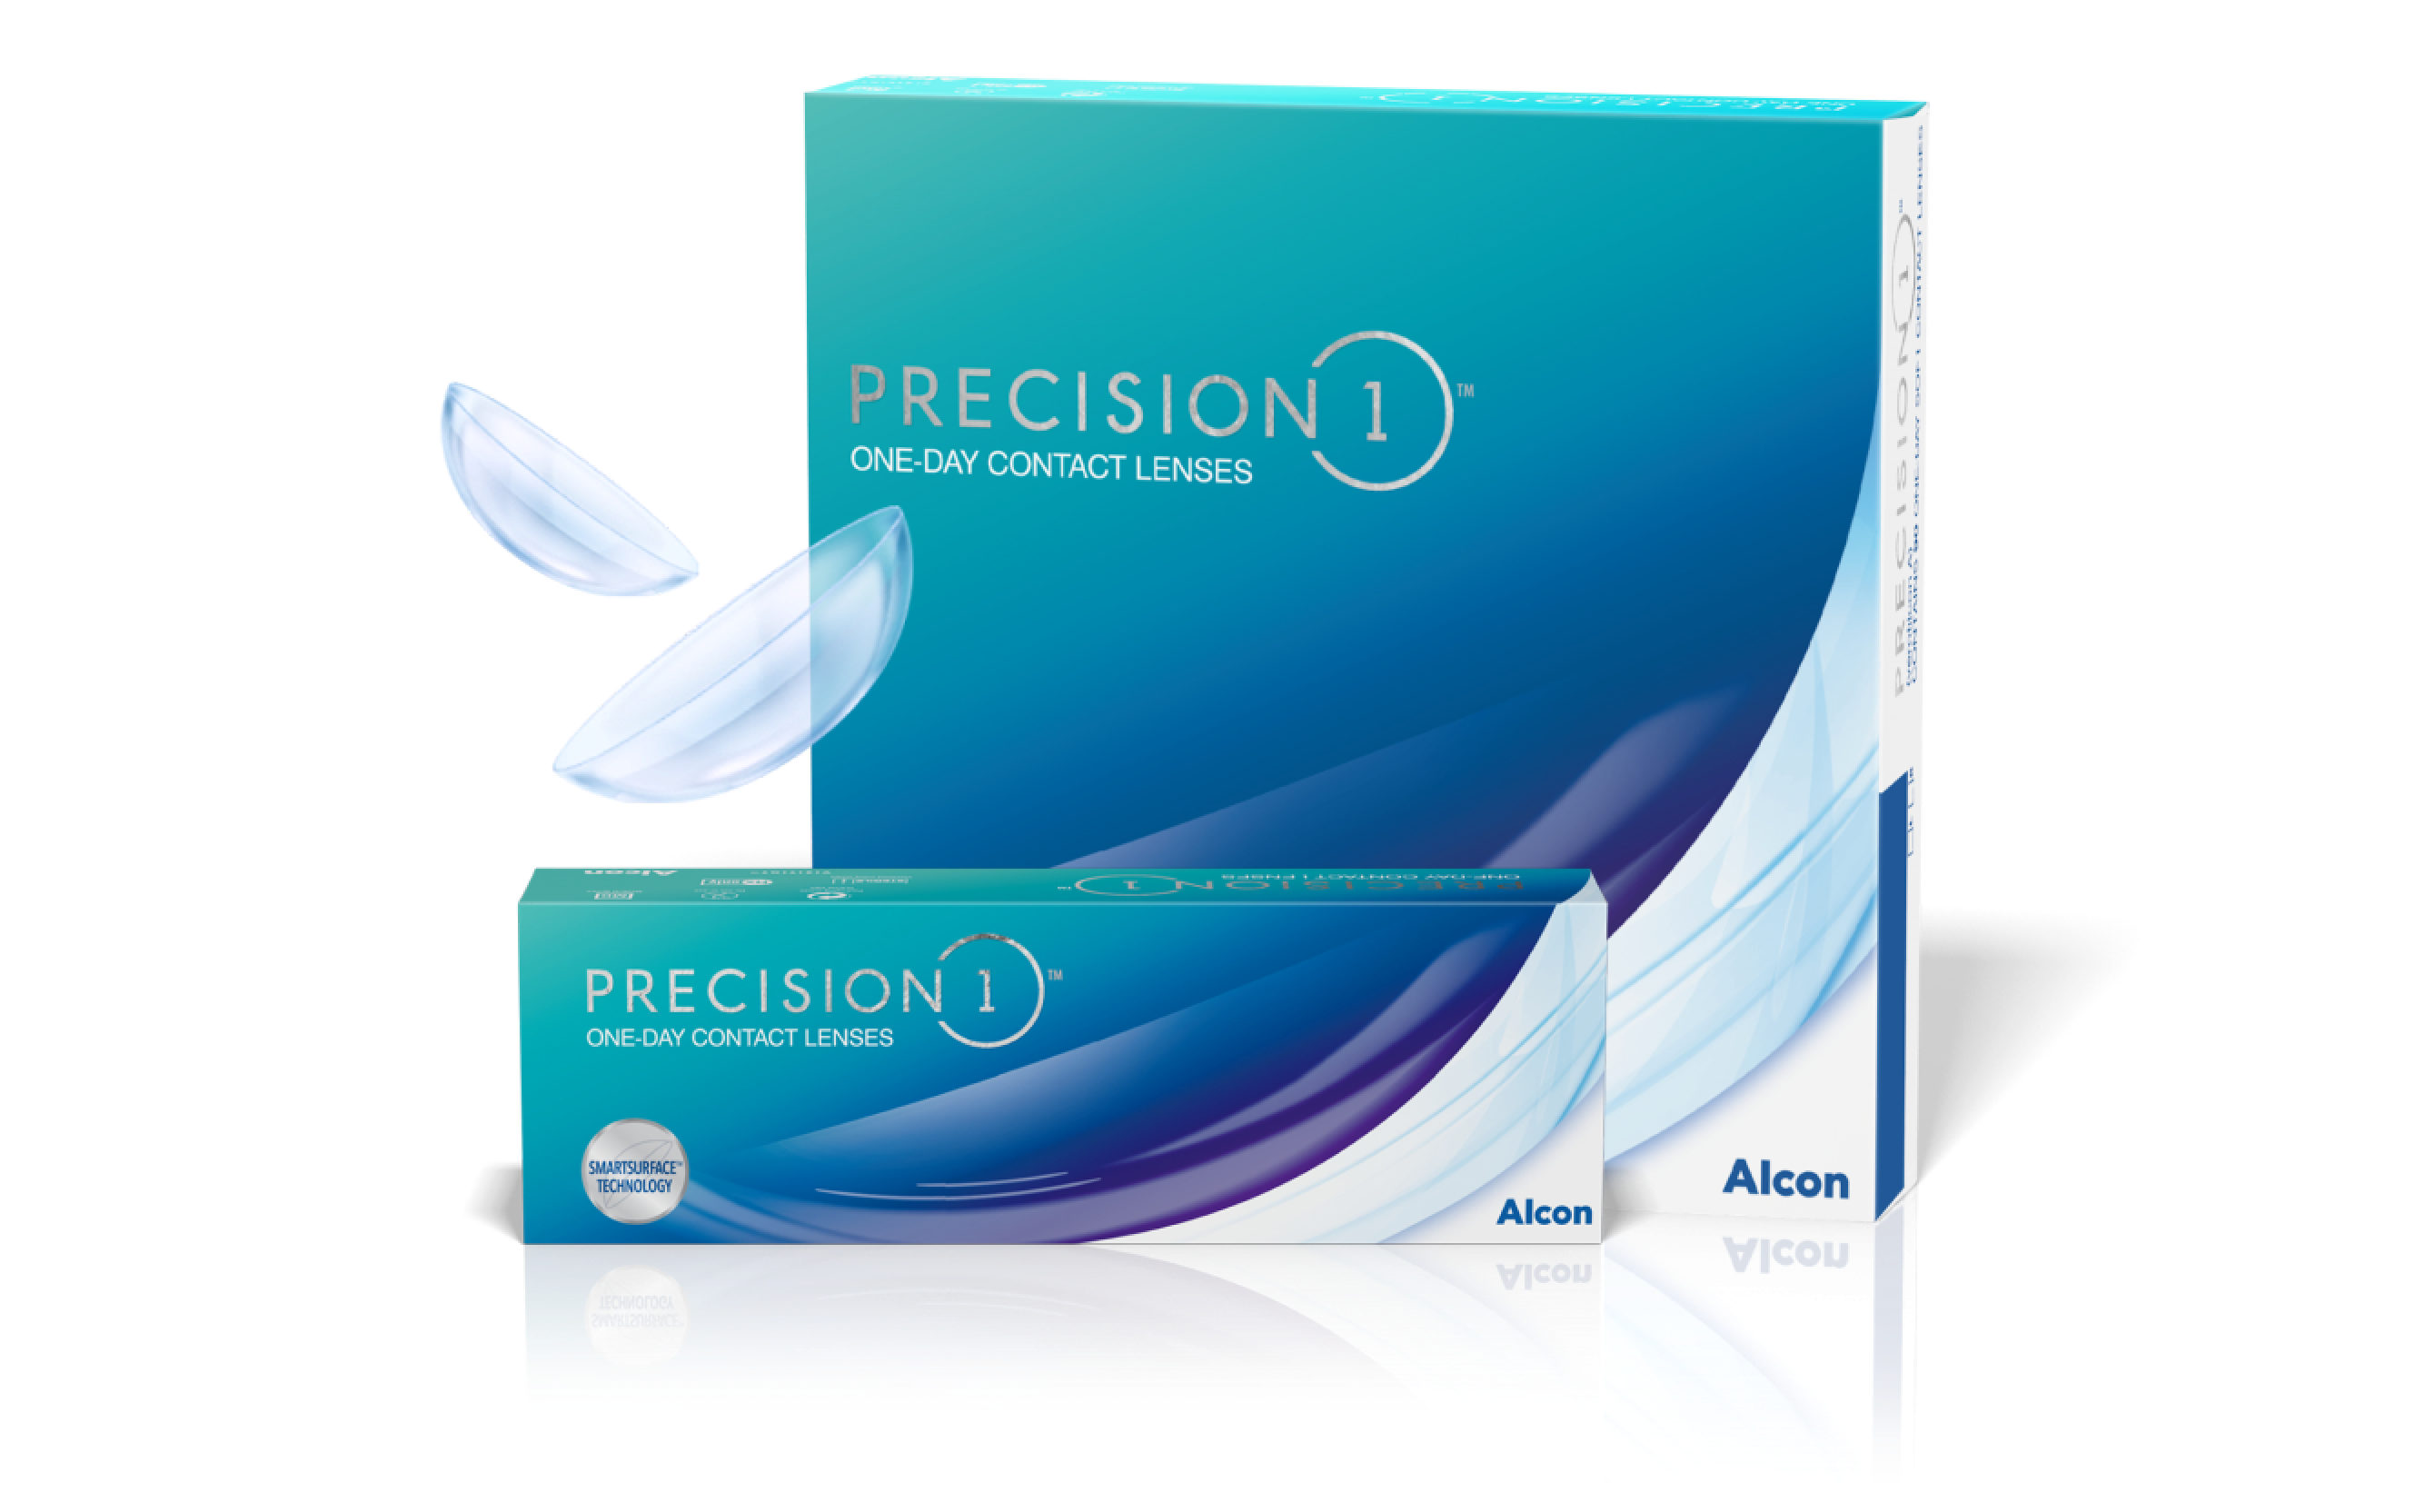 Precision1 One-Day Contact Lenses product boxes